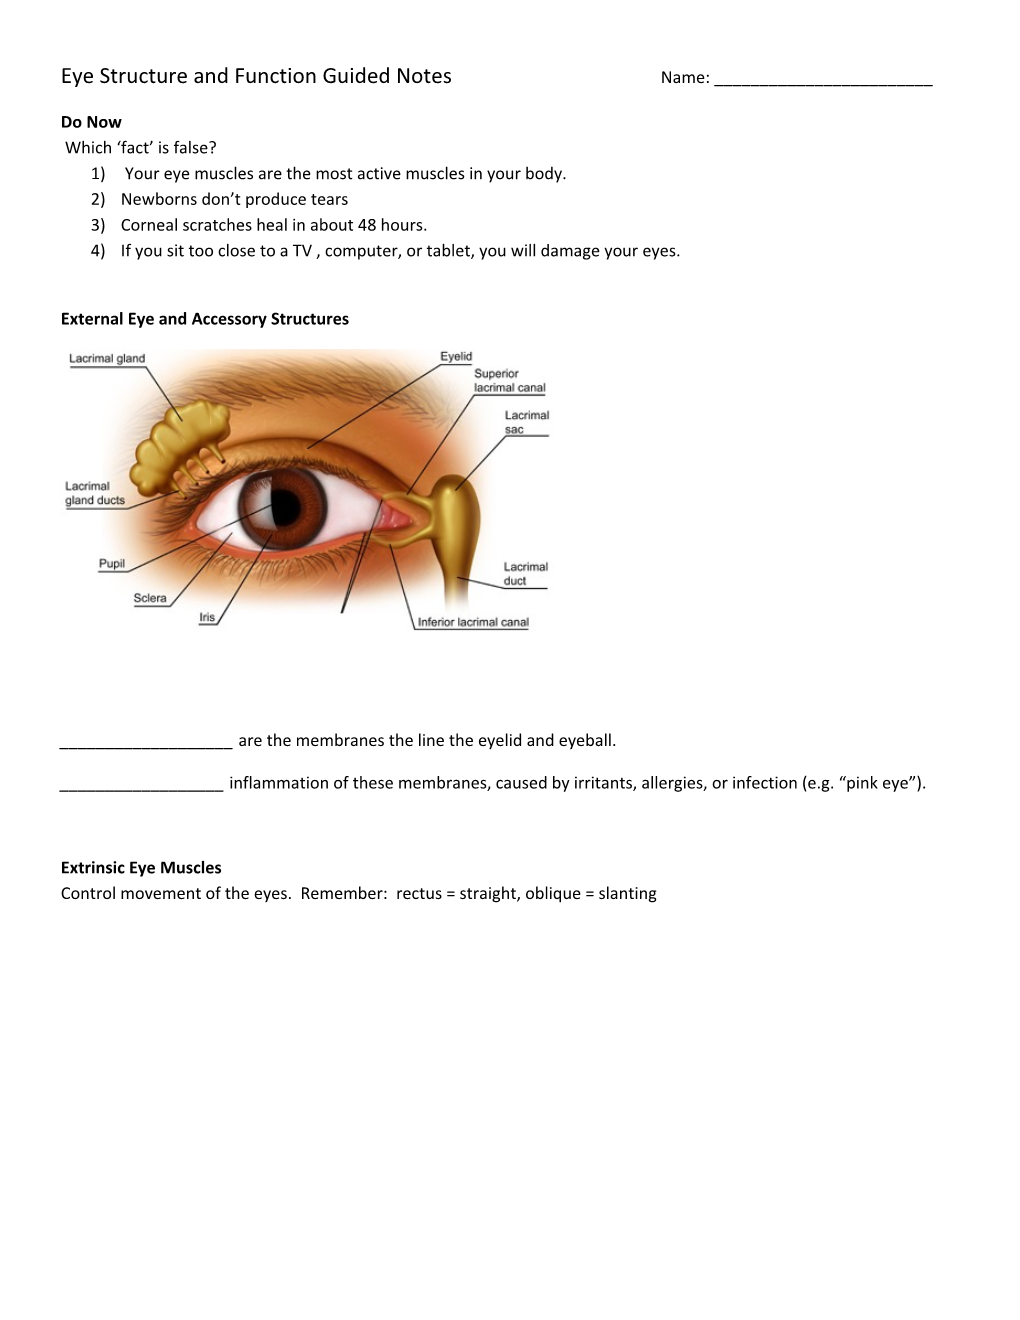 Eye Structure and Function Guided Notesname: ______